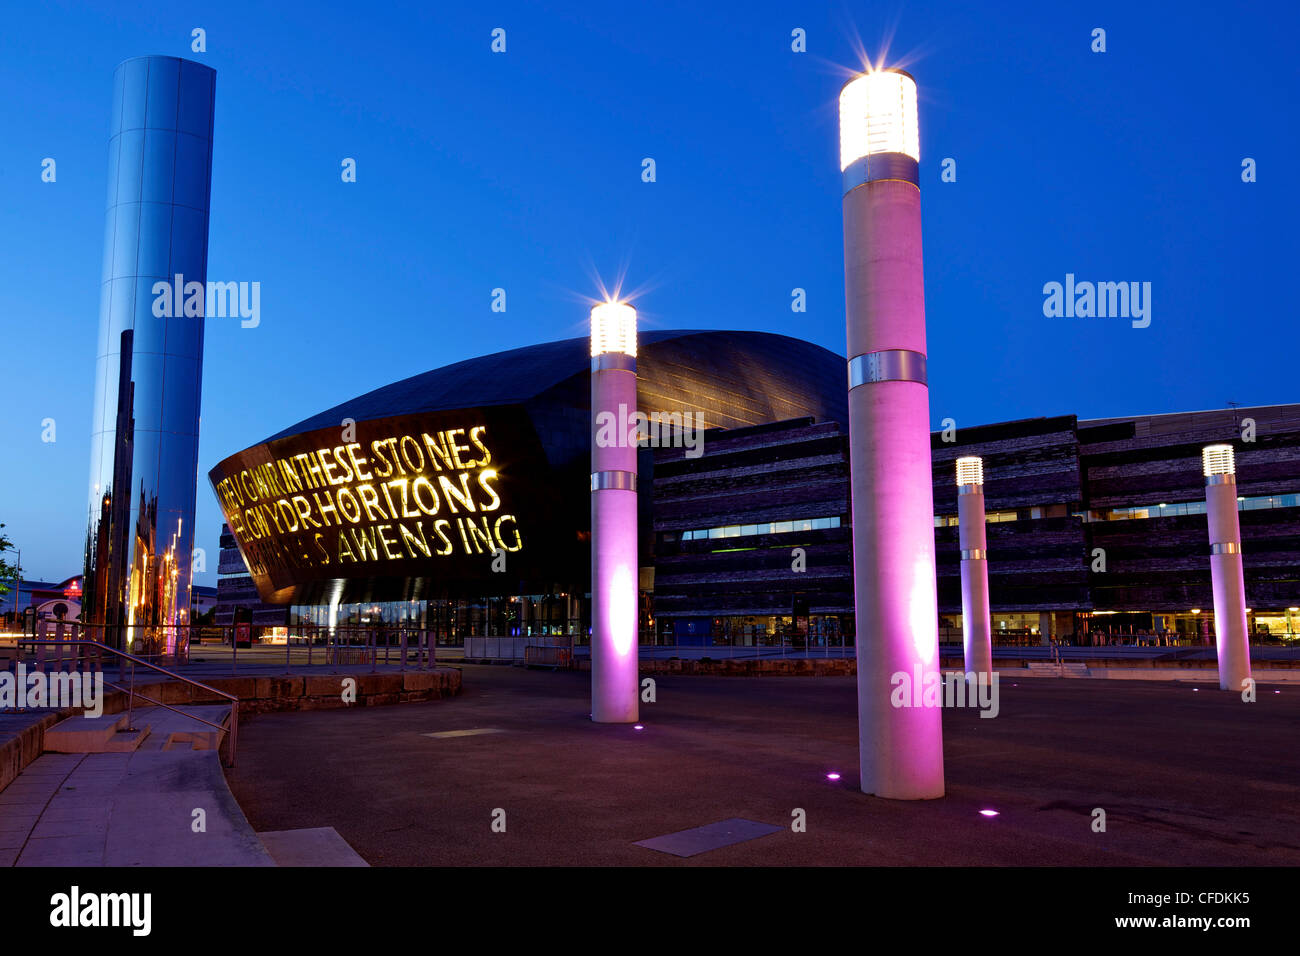 Wales Millennium Centre, Bute Place, Cardiff Bay, Cardiff, South Glamorgan, South Wales, Wales, United Kingdom, Europe Stock Photo